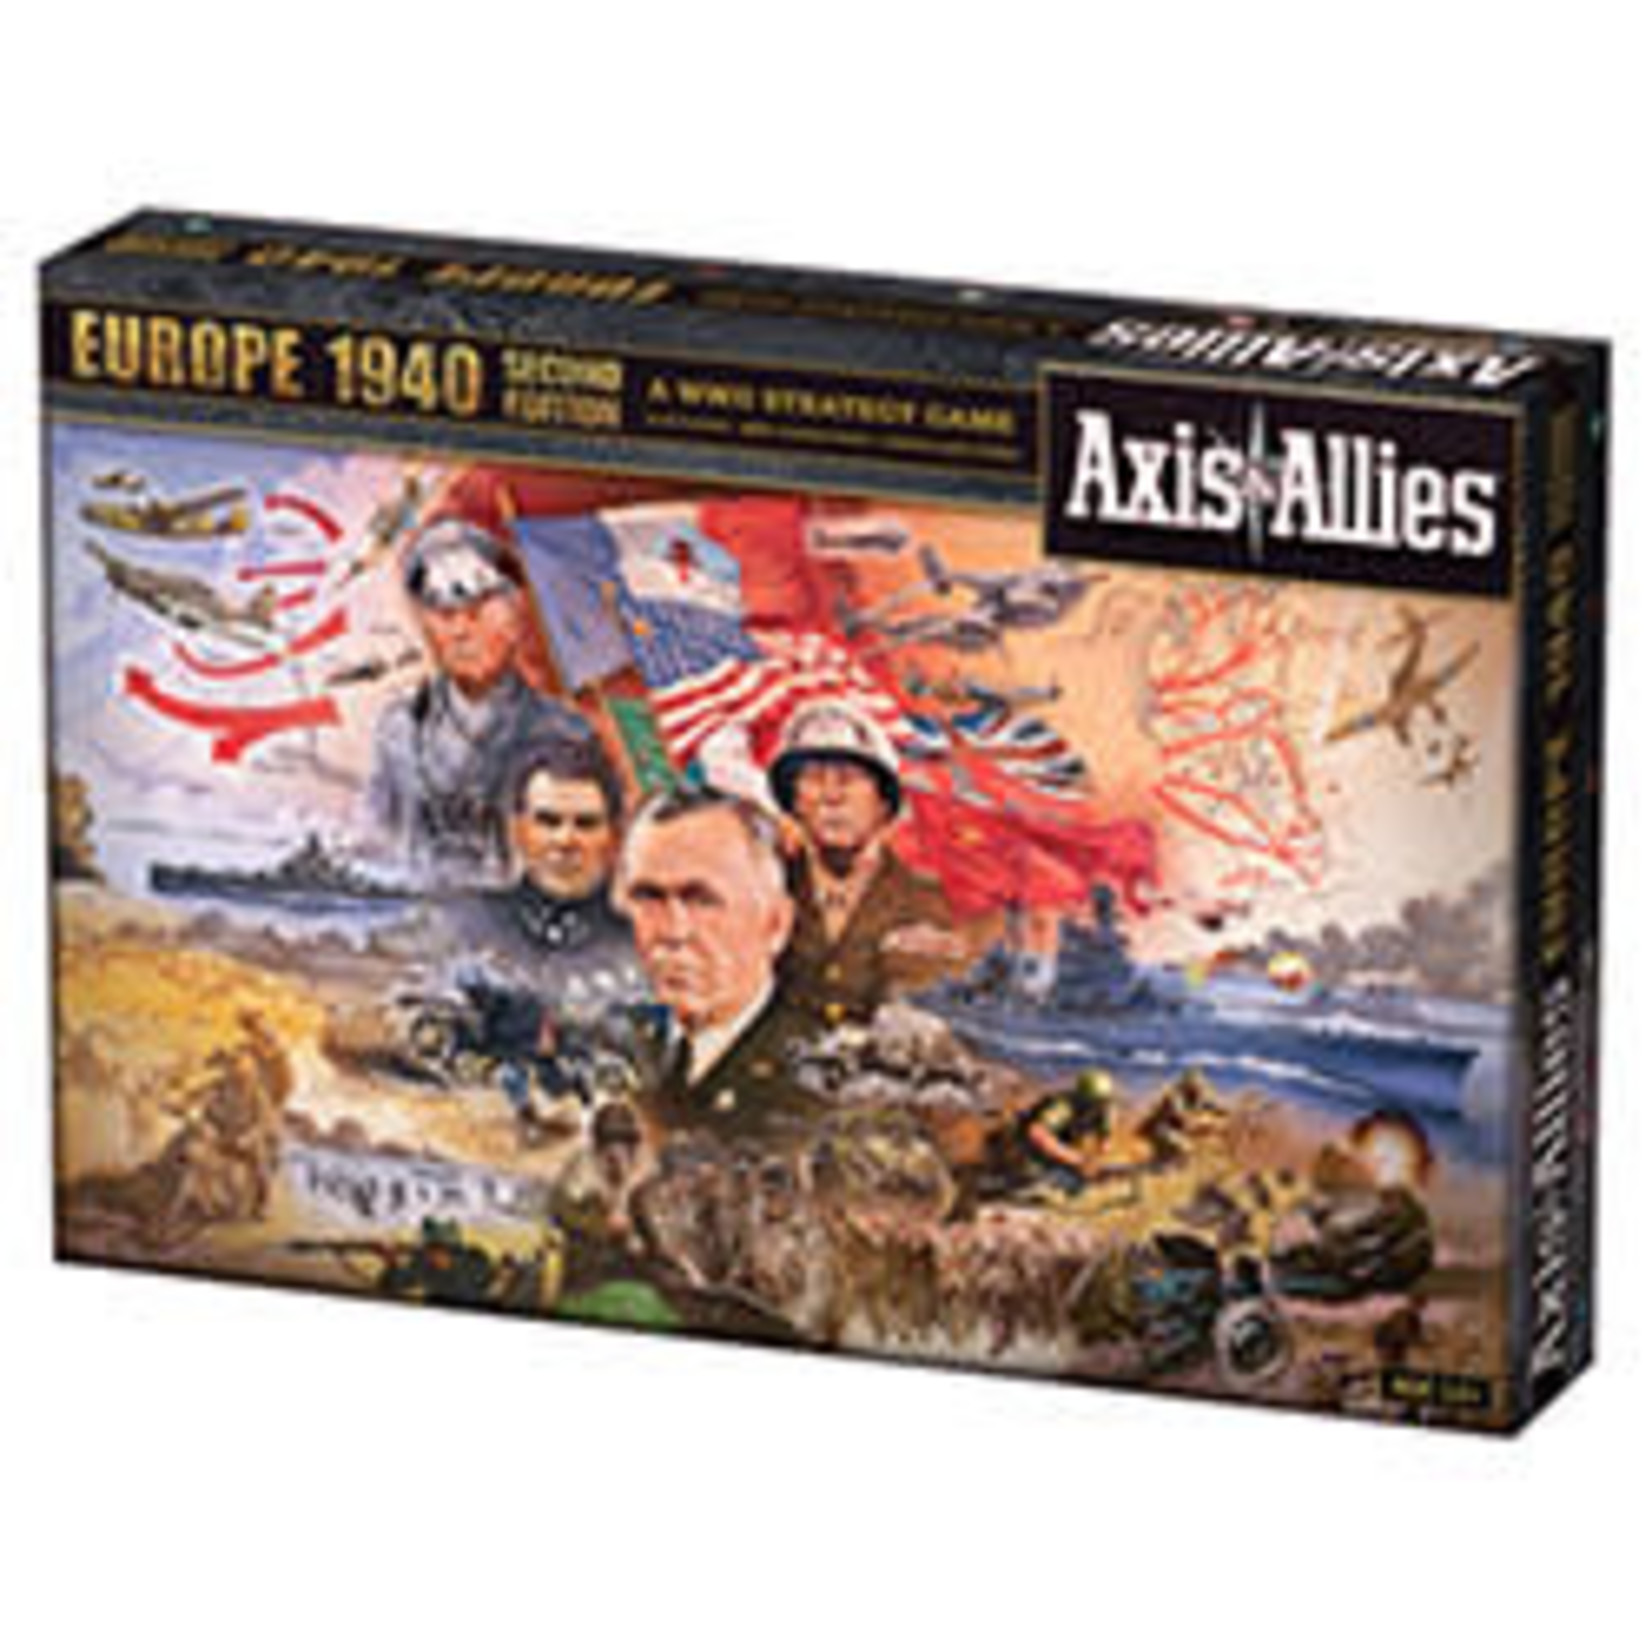 Renegade Game Studios Axis & Allies: 1940 Europe 2nd Edition